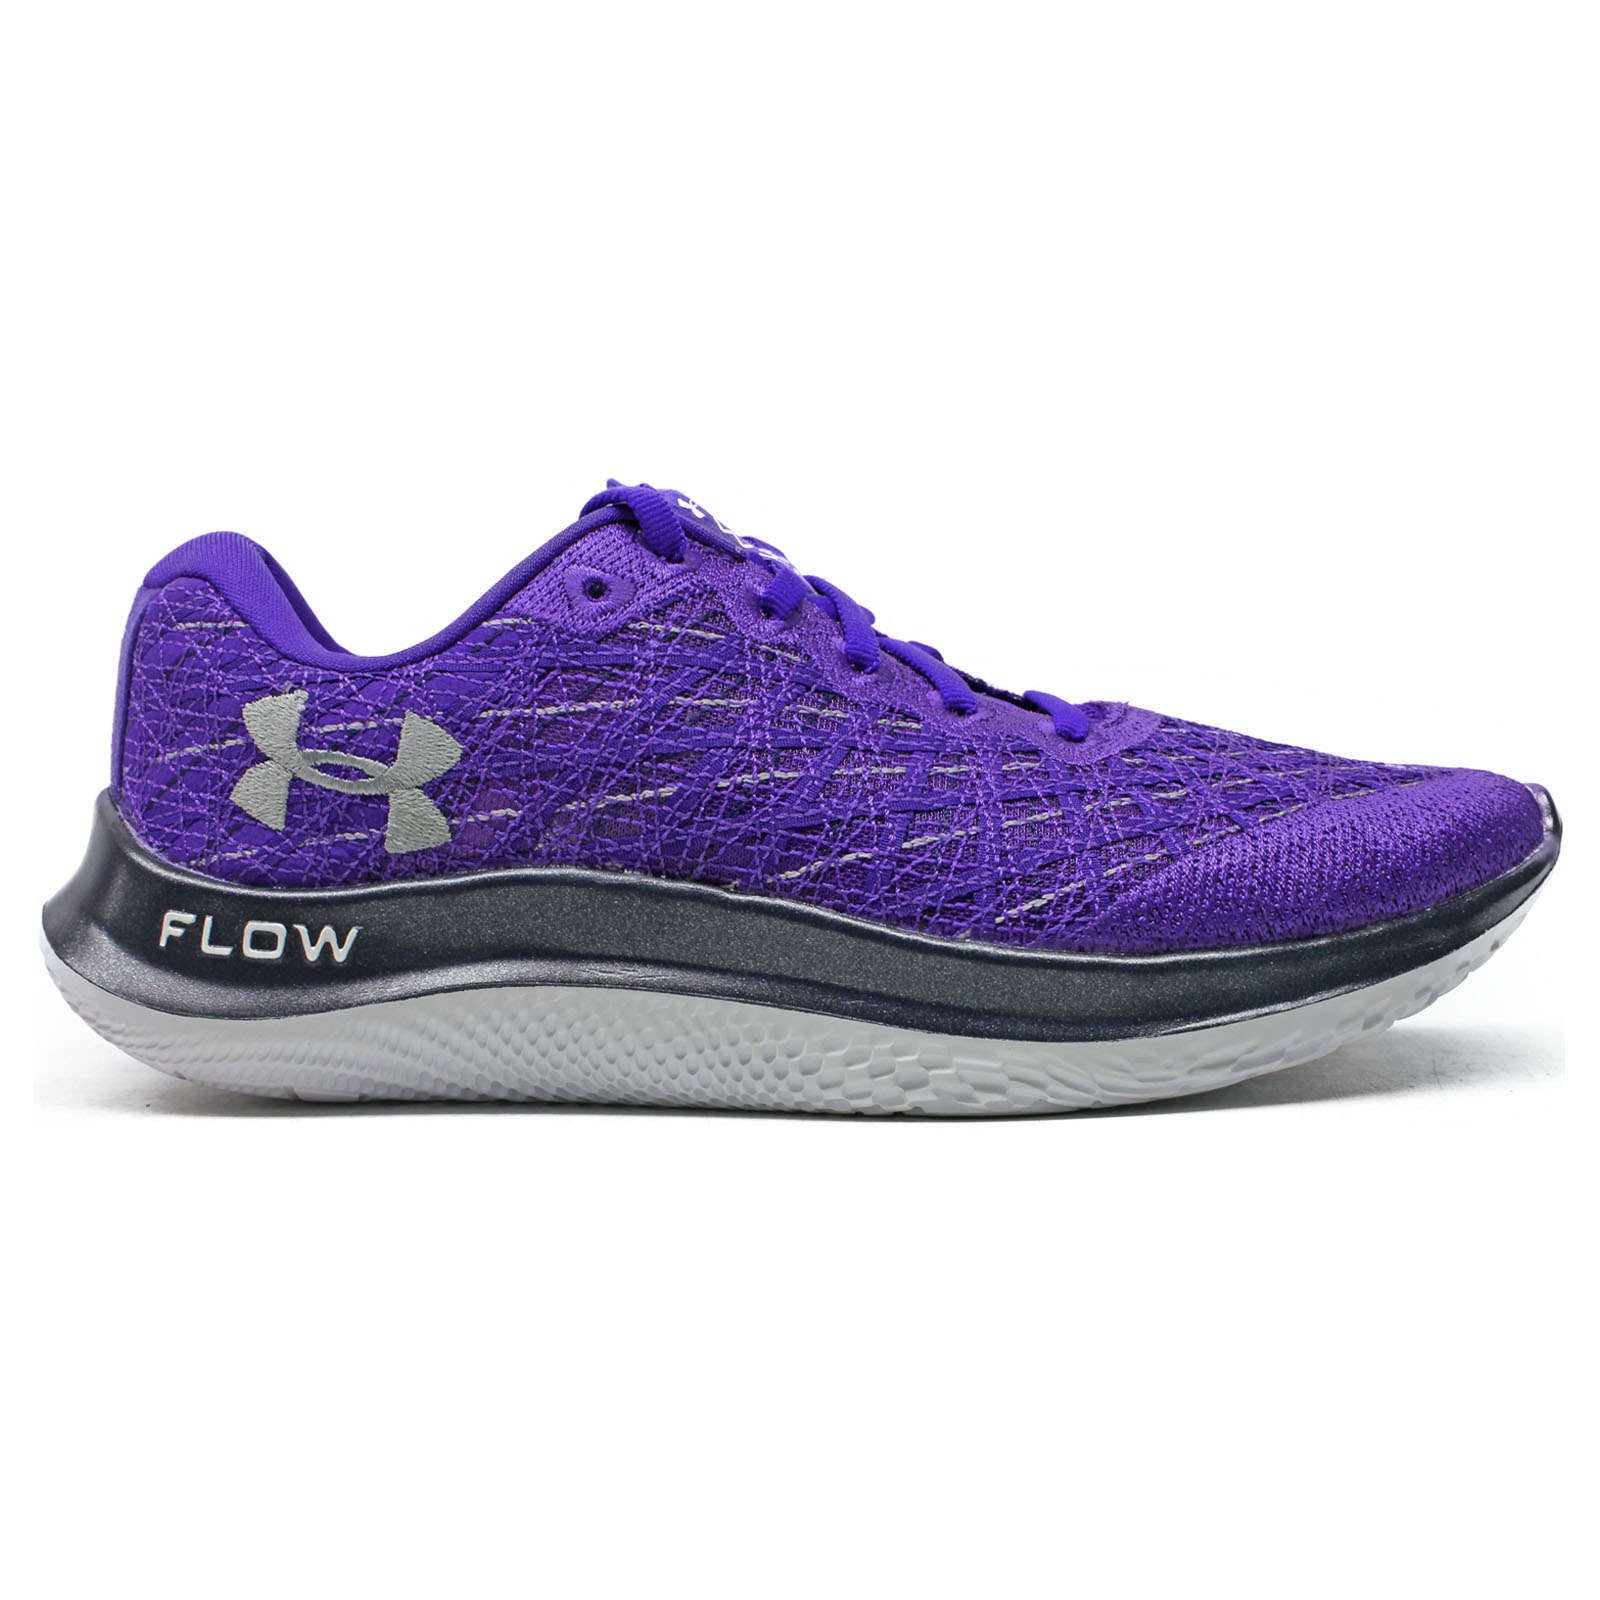 Under Armour Flow Velociti Wind Synthetic Textile Women's Low-Top Trainers#color_purple navy